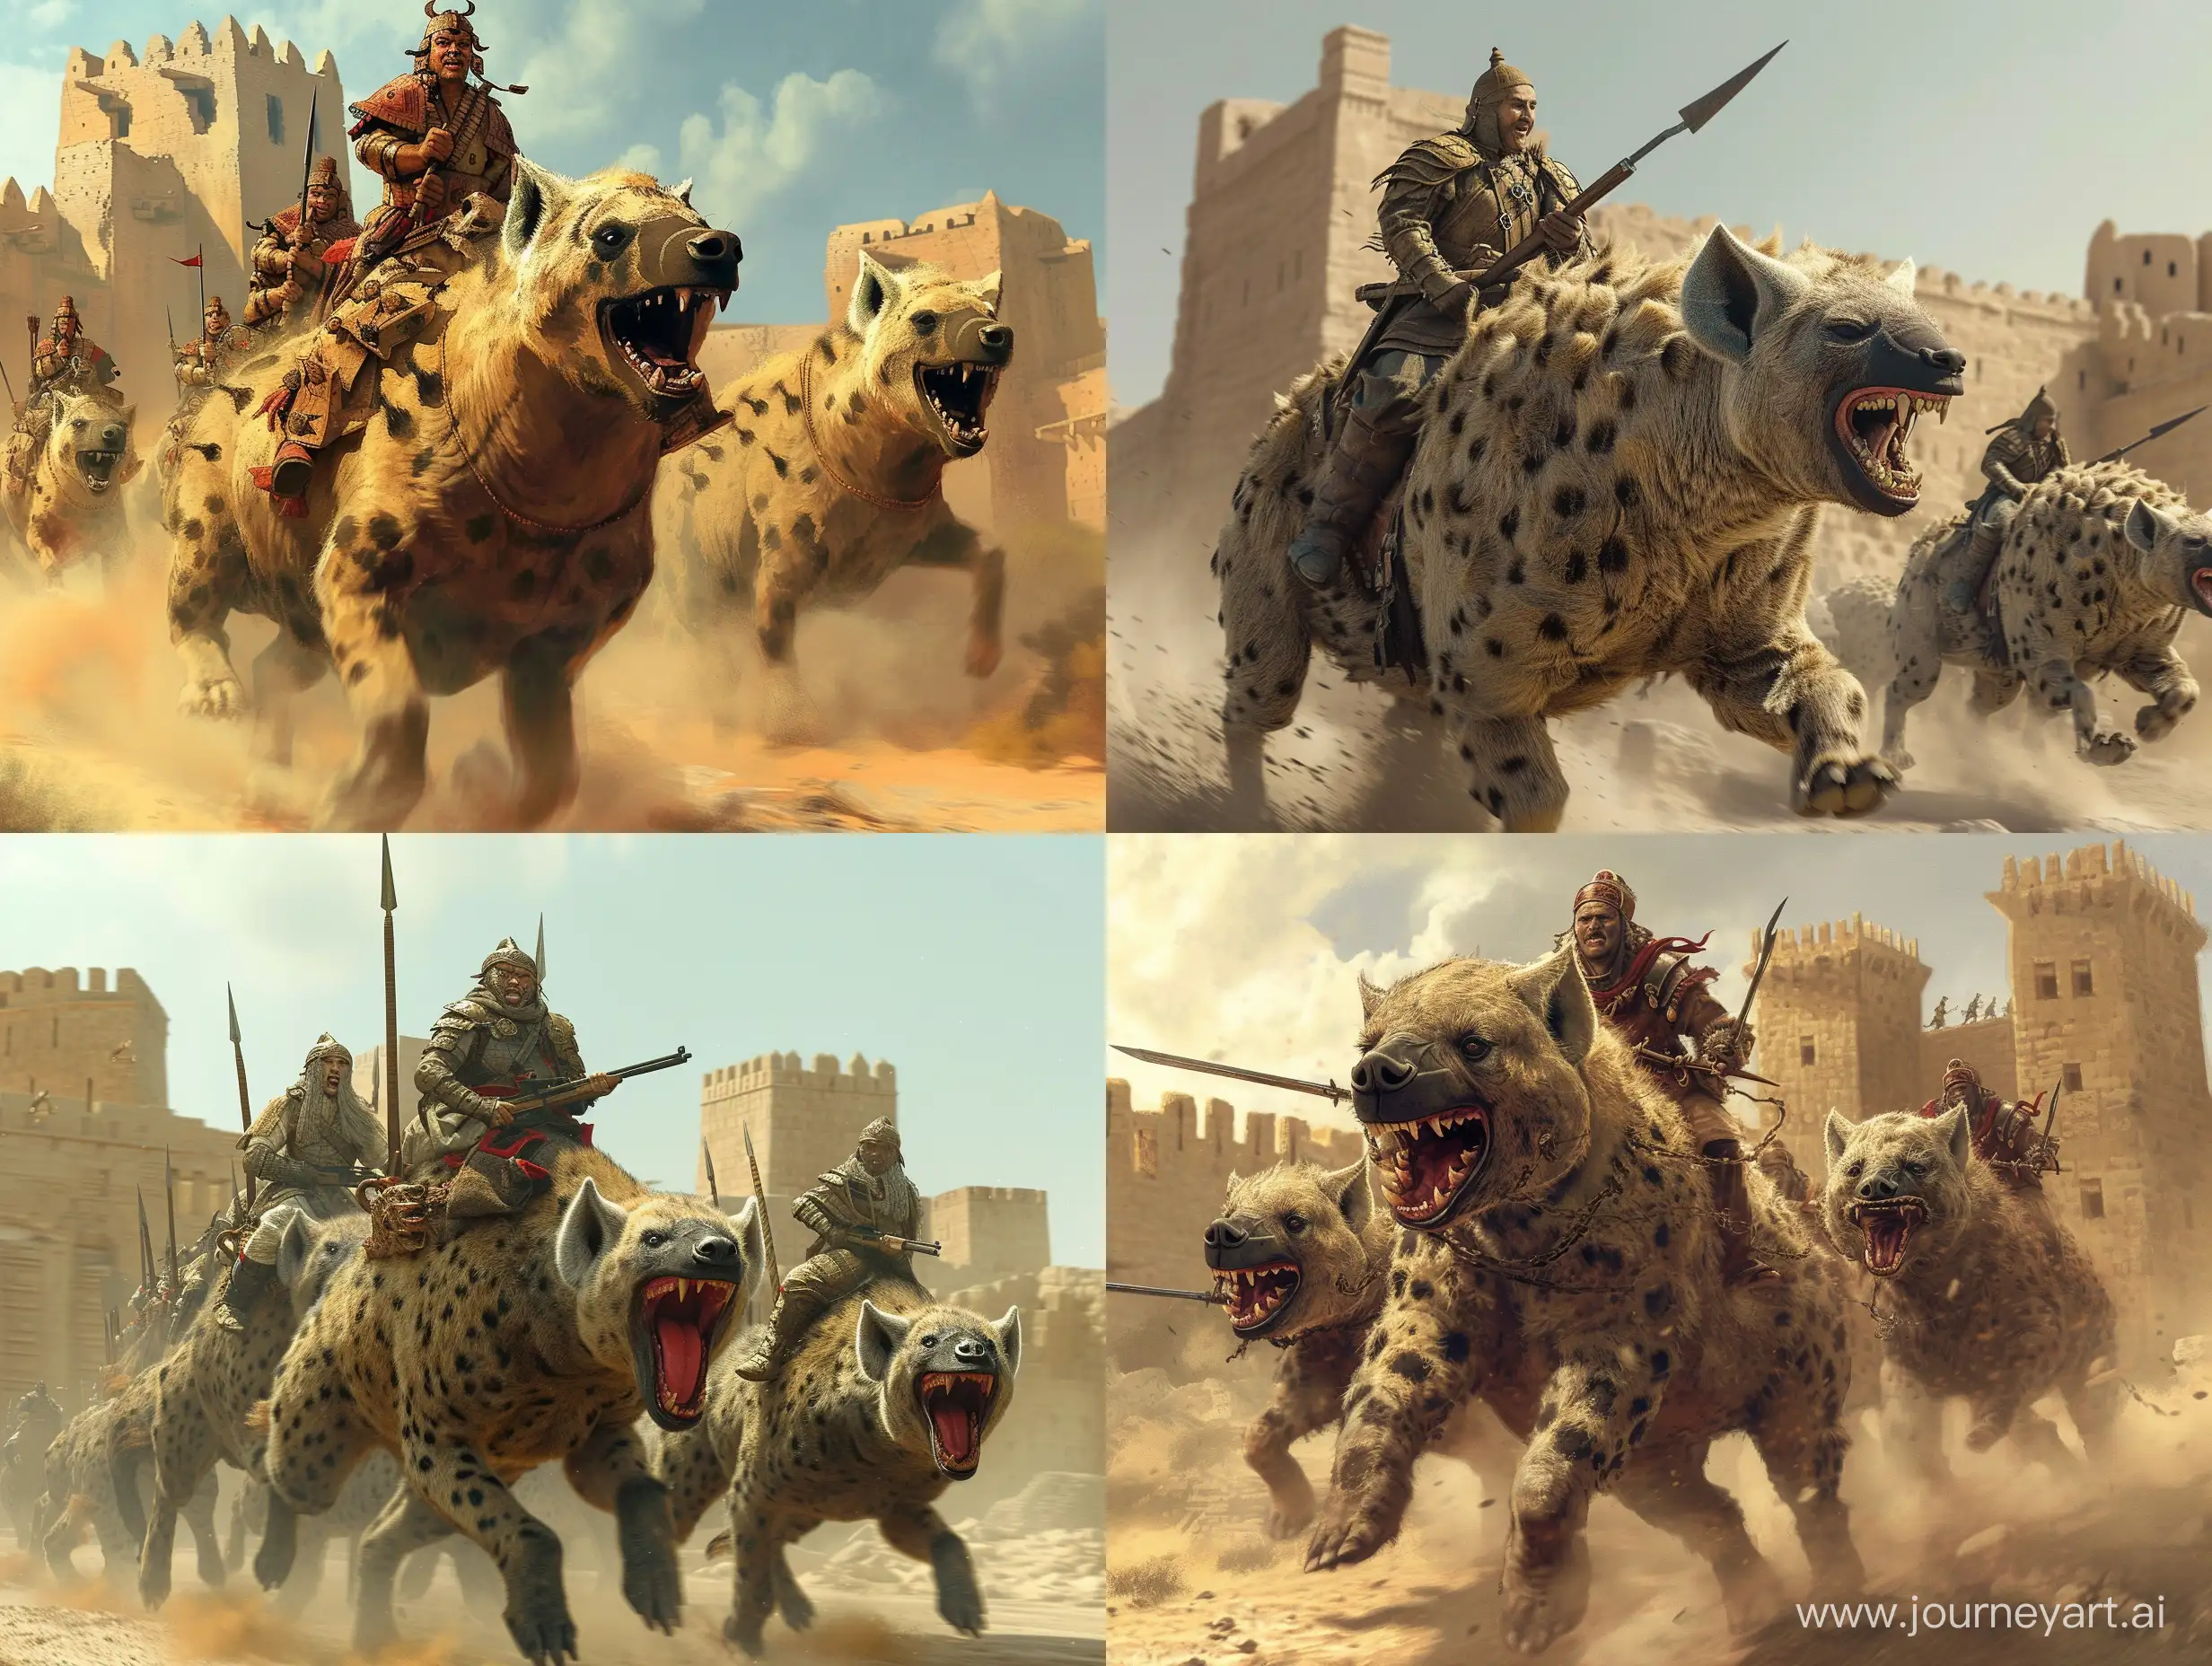 Mongol-Soldiers-Conquer-Arg-Bam-on-Smiling-Hyenas